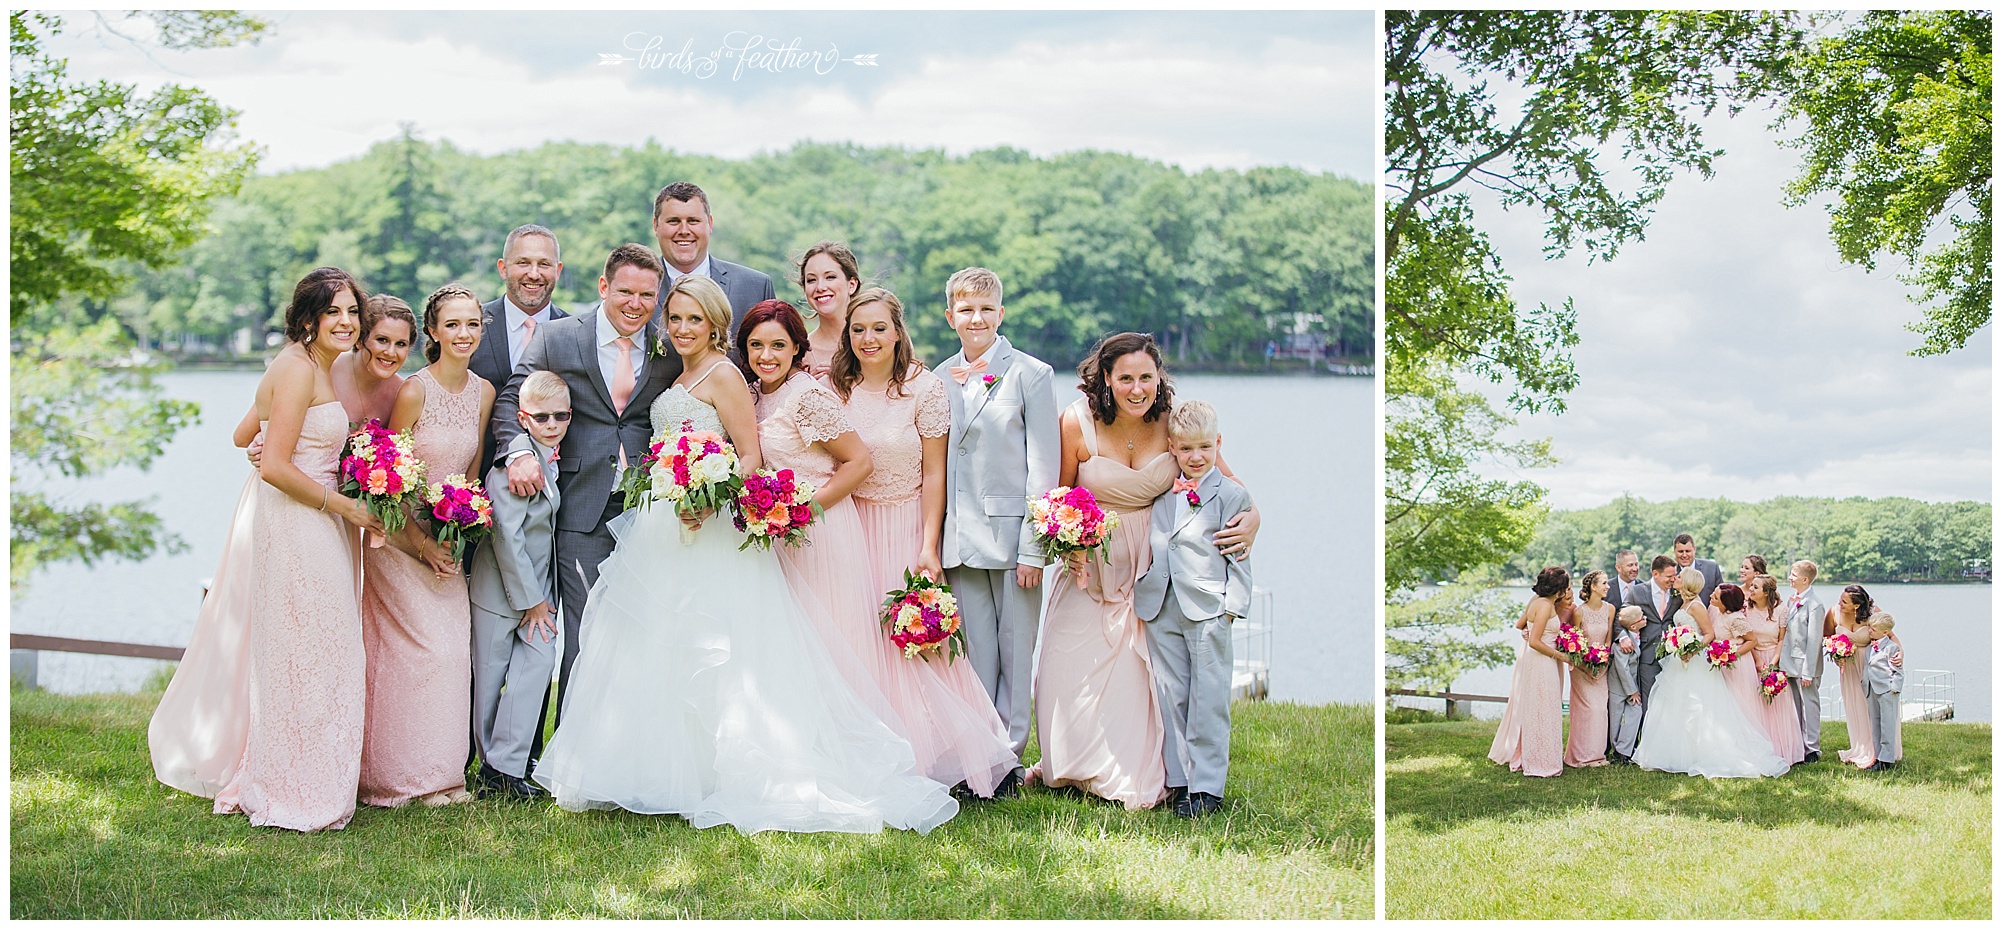 Birds of a Feather Photography, Woodloch Resort, Hawley Pa, Wedding Photography, Wedding Photographer